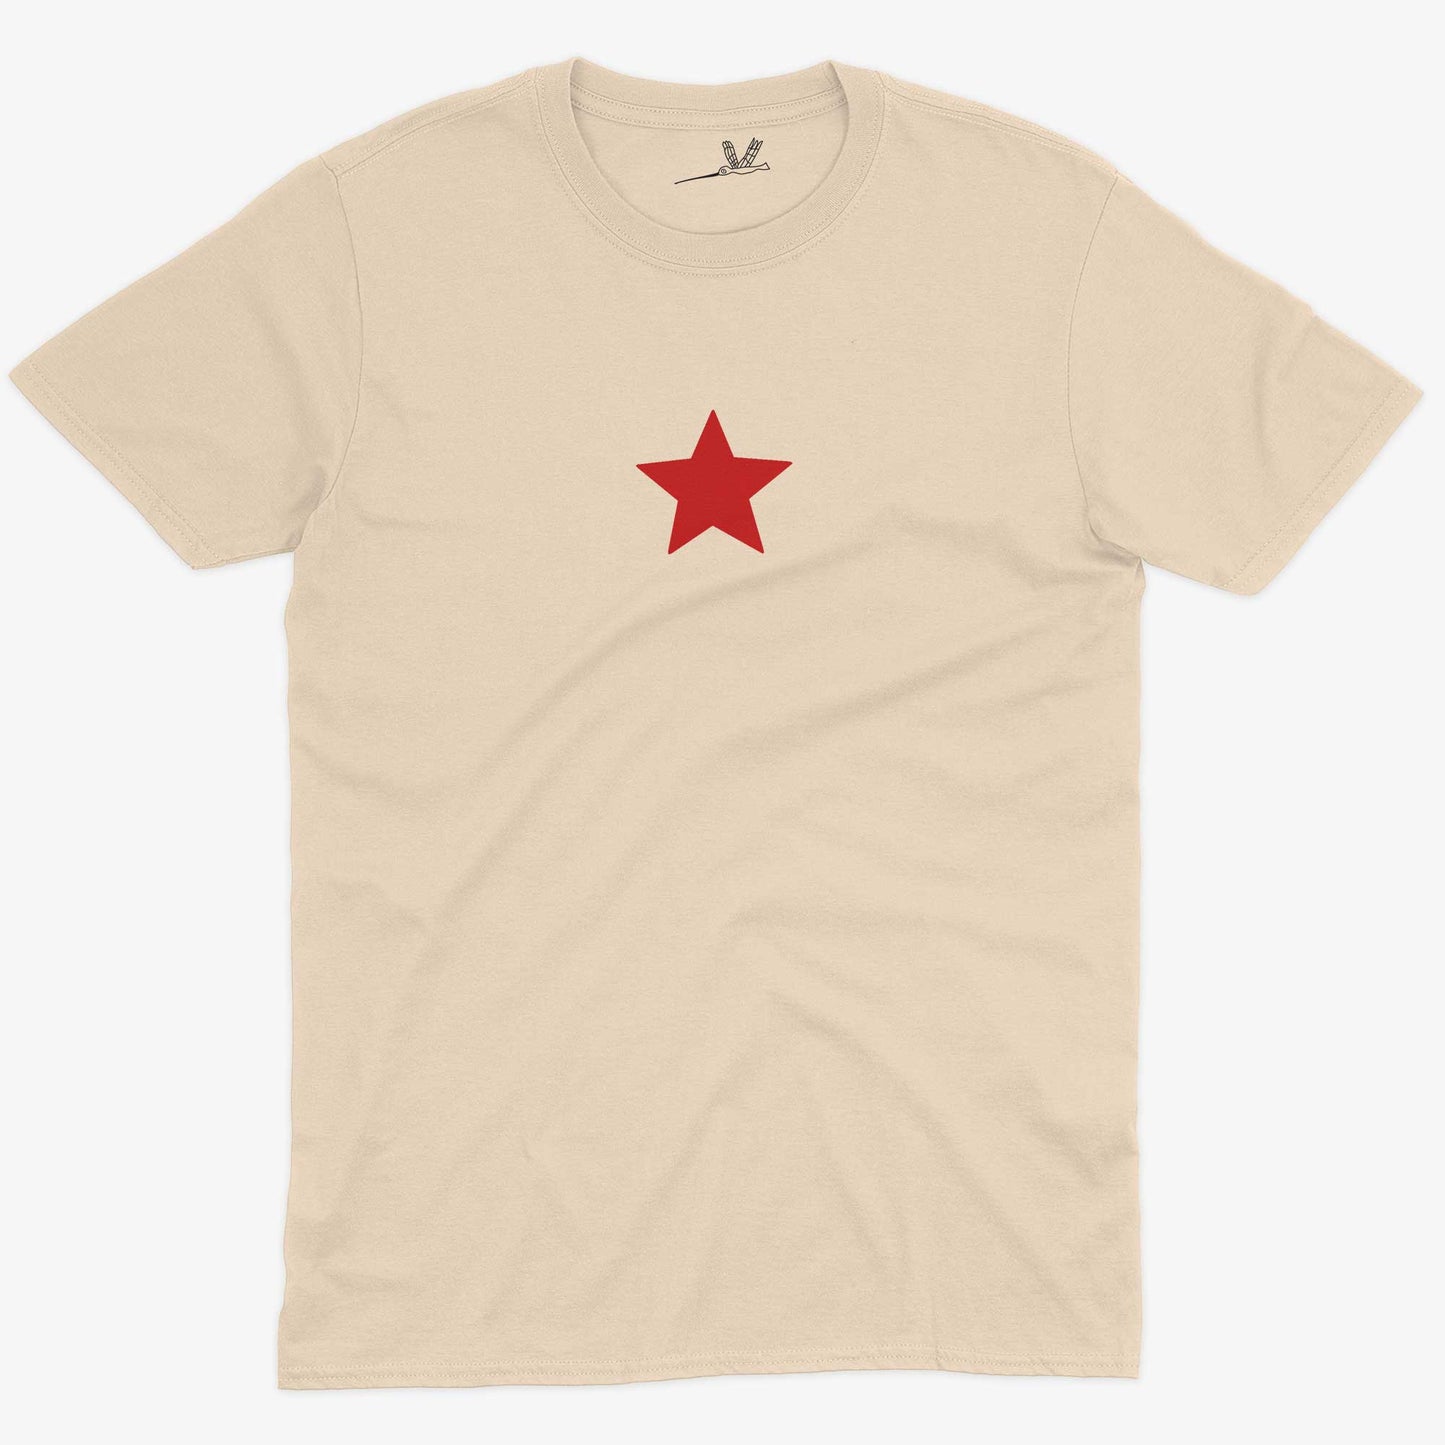 Five-Point Red Star Unisex Or Women's Cotton T-shirt-Organic Natural-Unisex